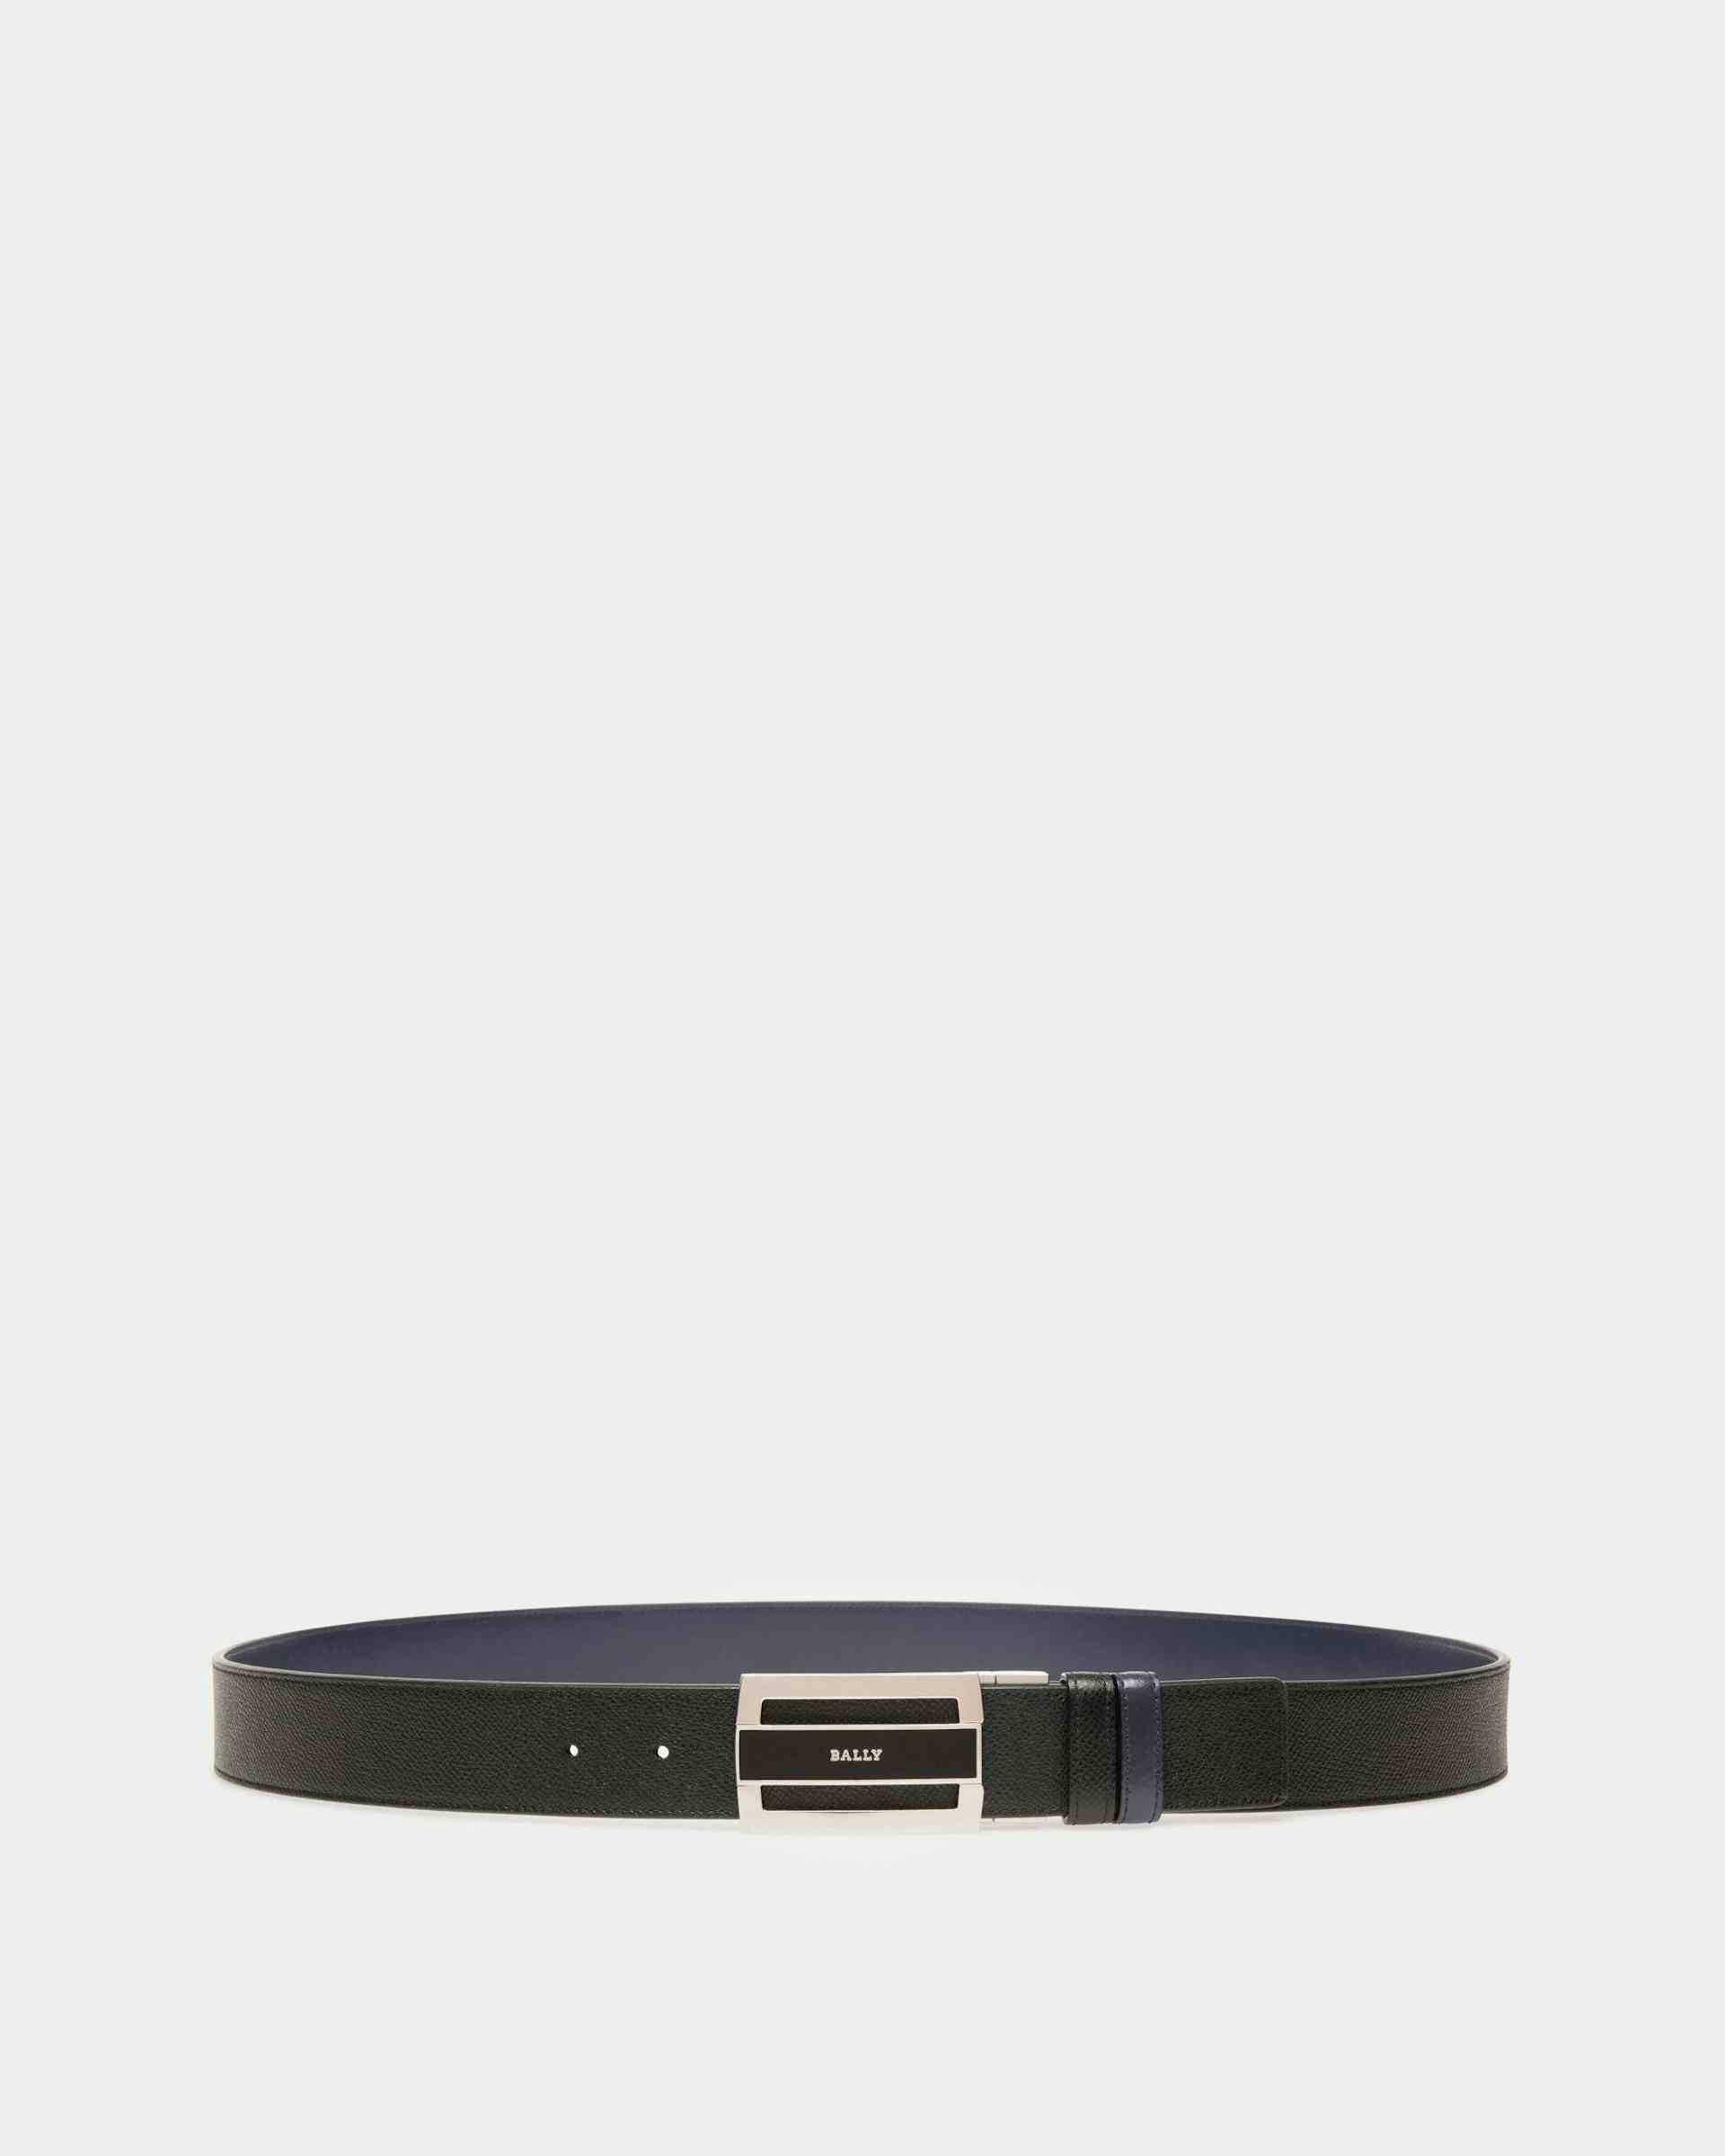 Fabazia Leather 35mm Belt In Black & Navy - Homme - Bally